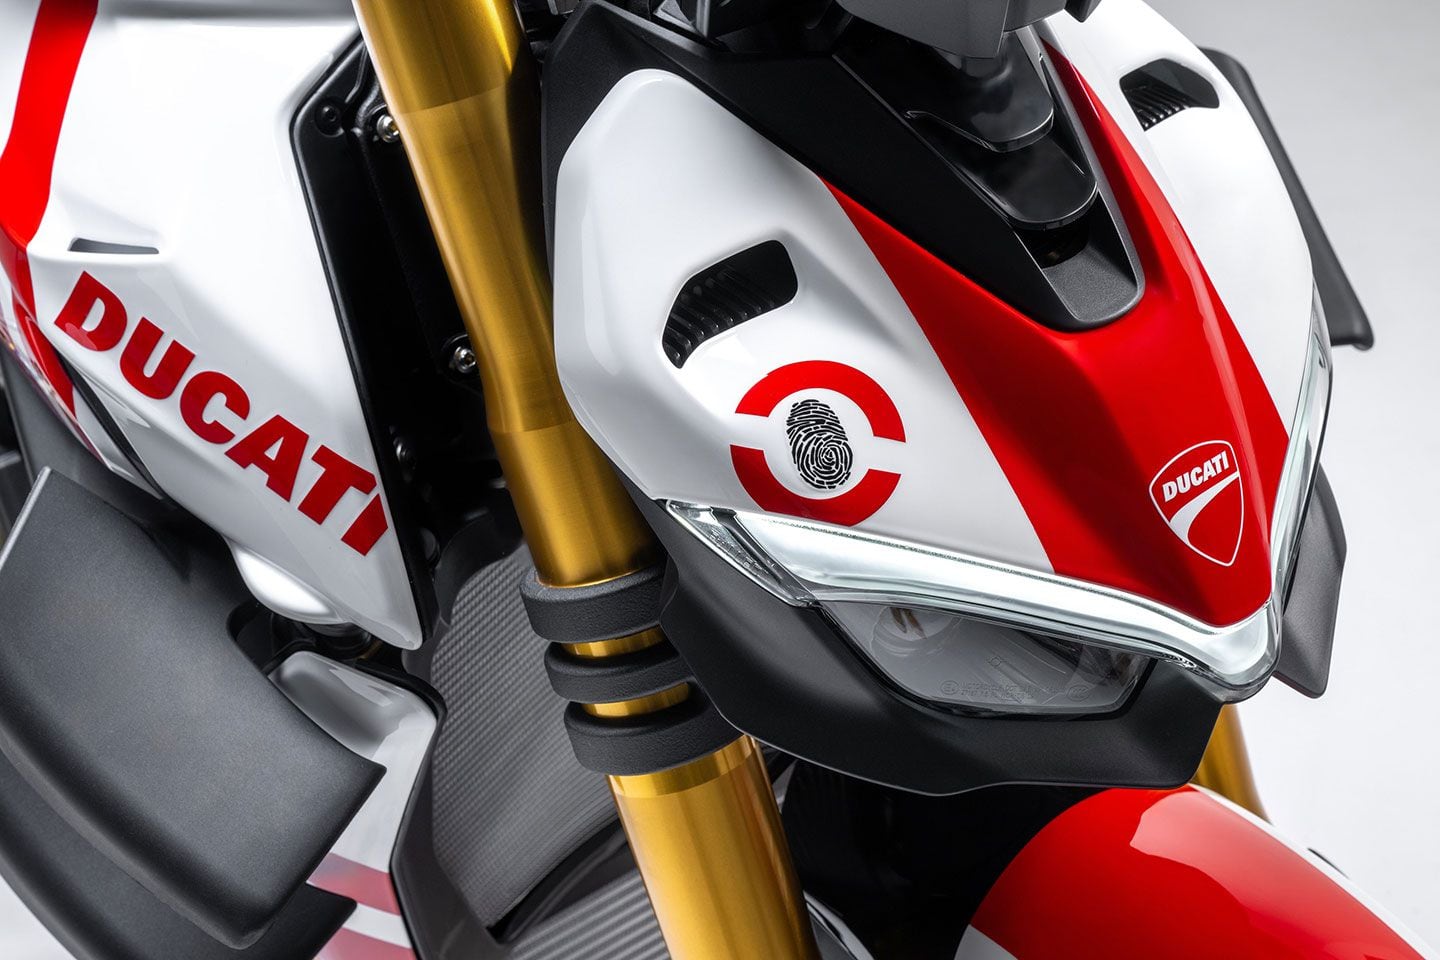 The red and white treatment completely transforms the Streetfighter’s aesthetic, though there are no mechanical changes to the bike from the standard V4 S.